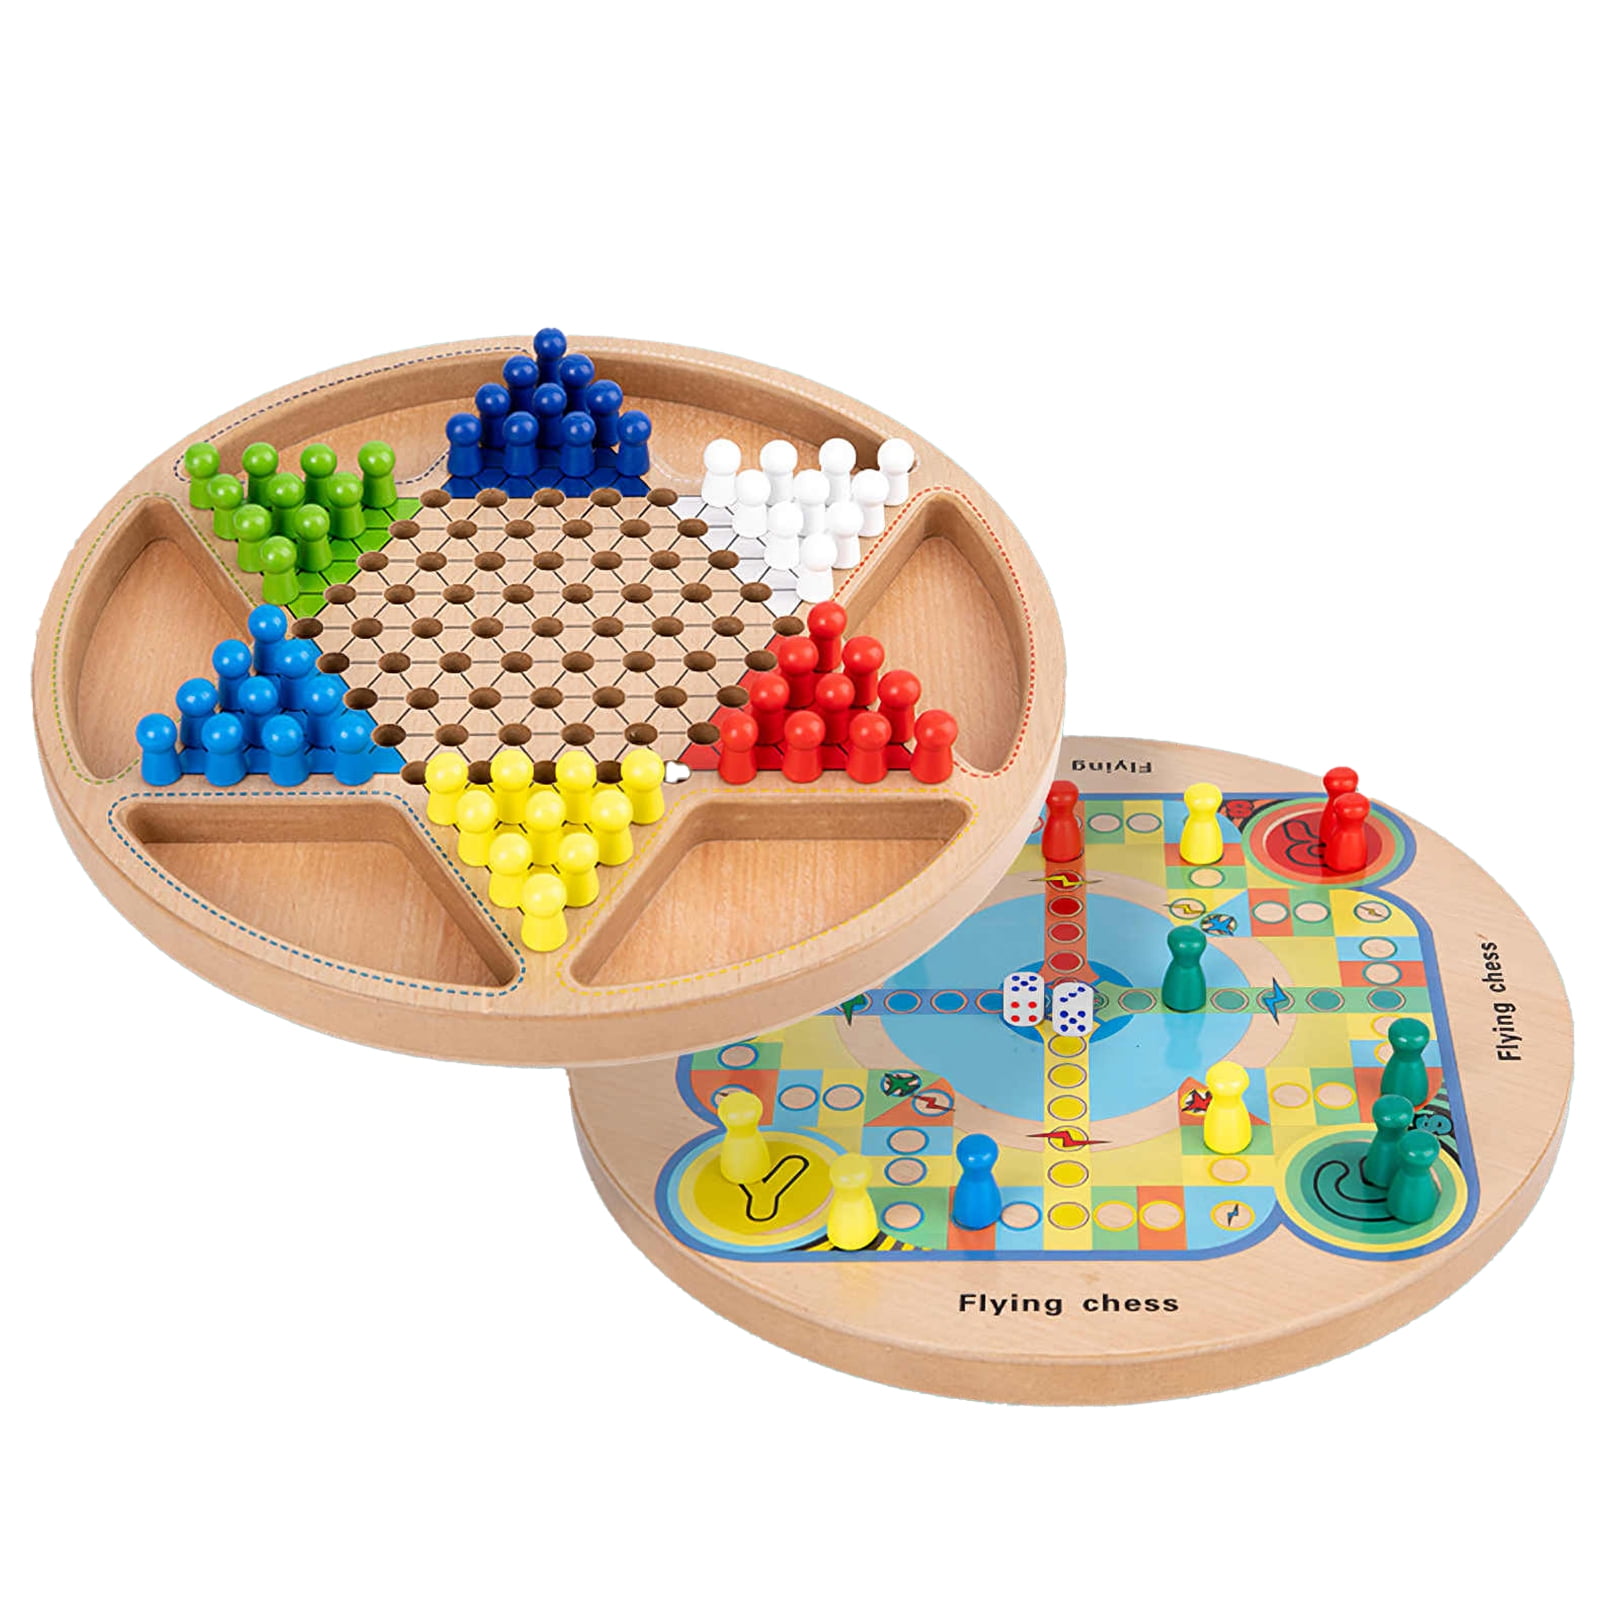 FUN Wooden Game Set 2 in 1 Chinese Checkers Flying Chess for Kids and Adults 